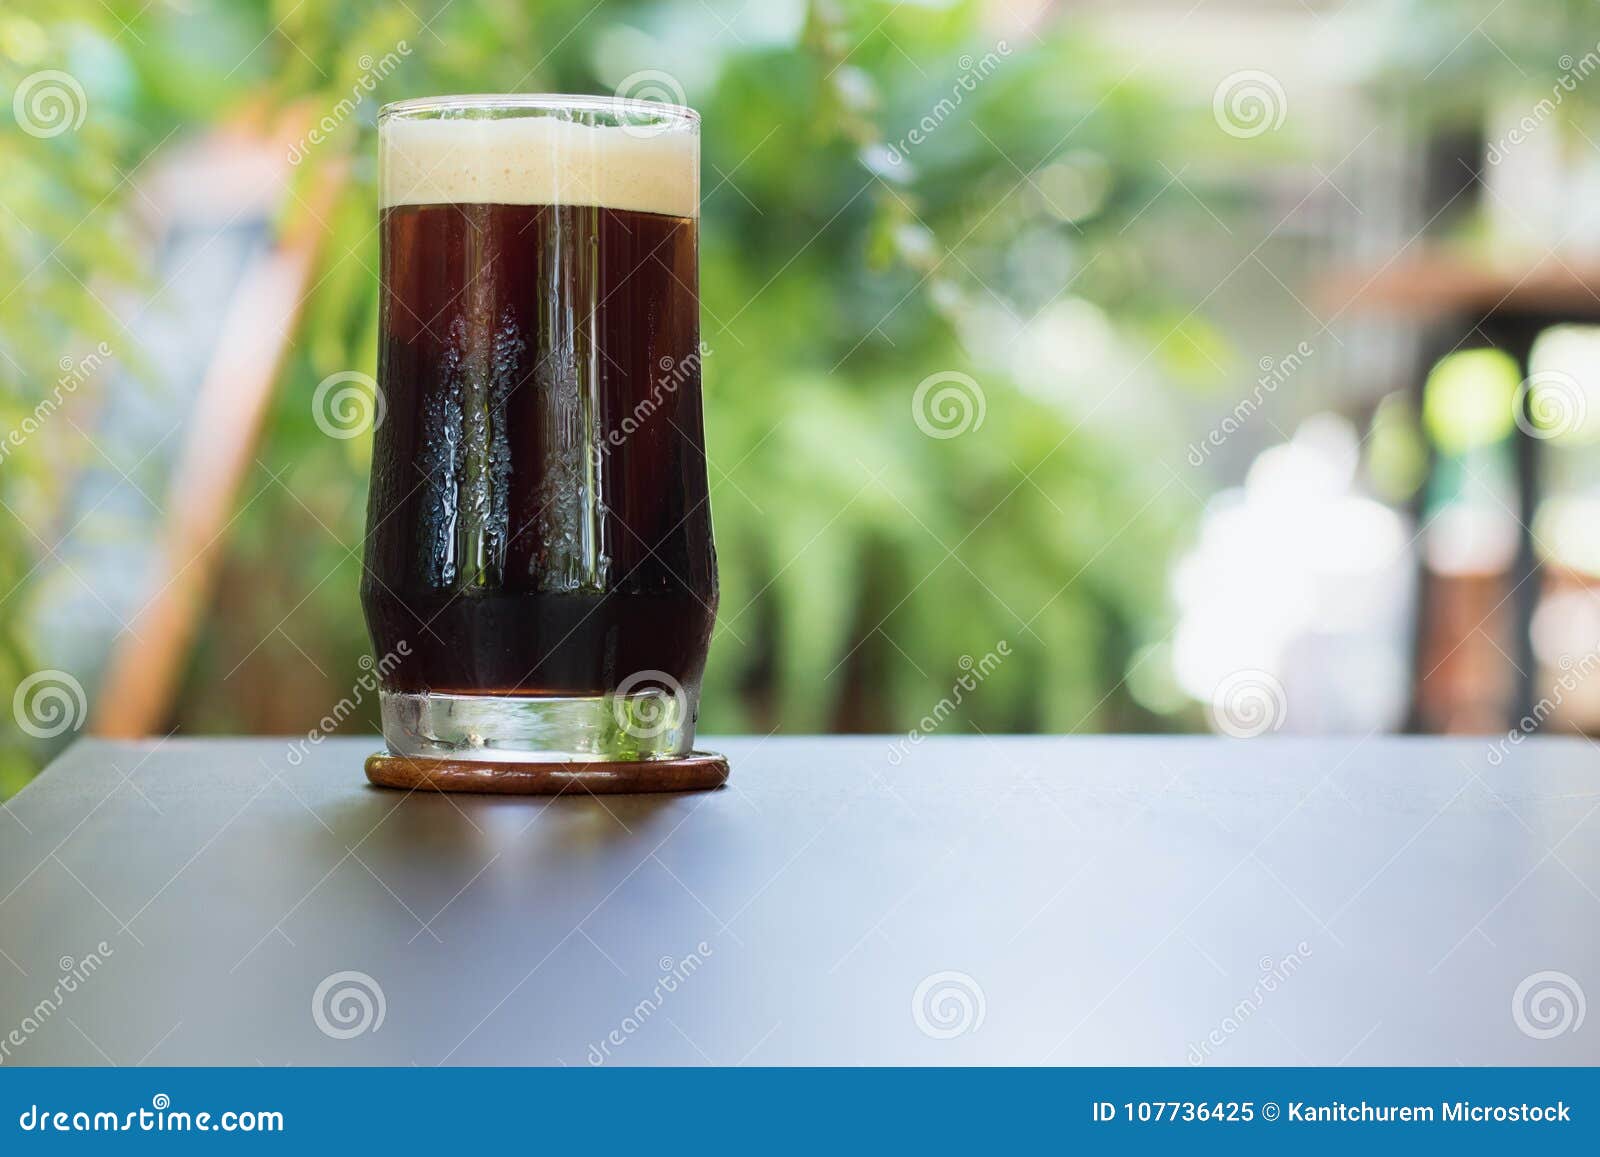 coffee nitro cold brew in glass on table outdoor cafe